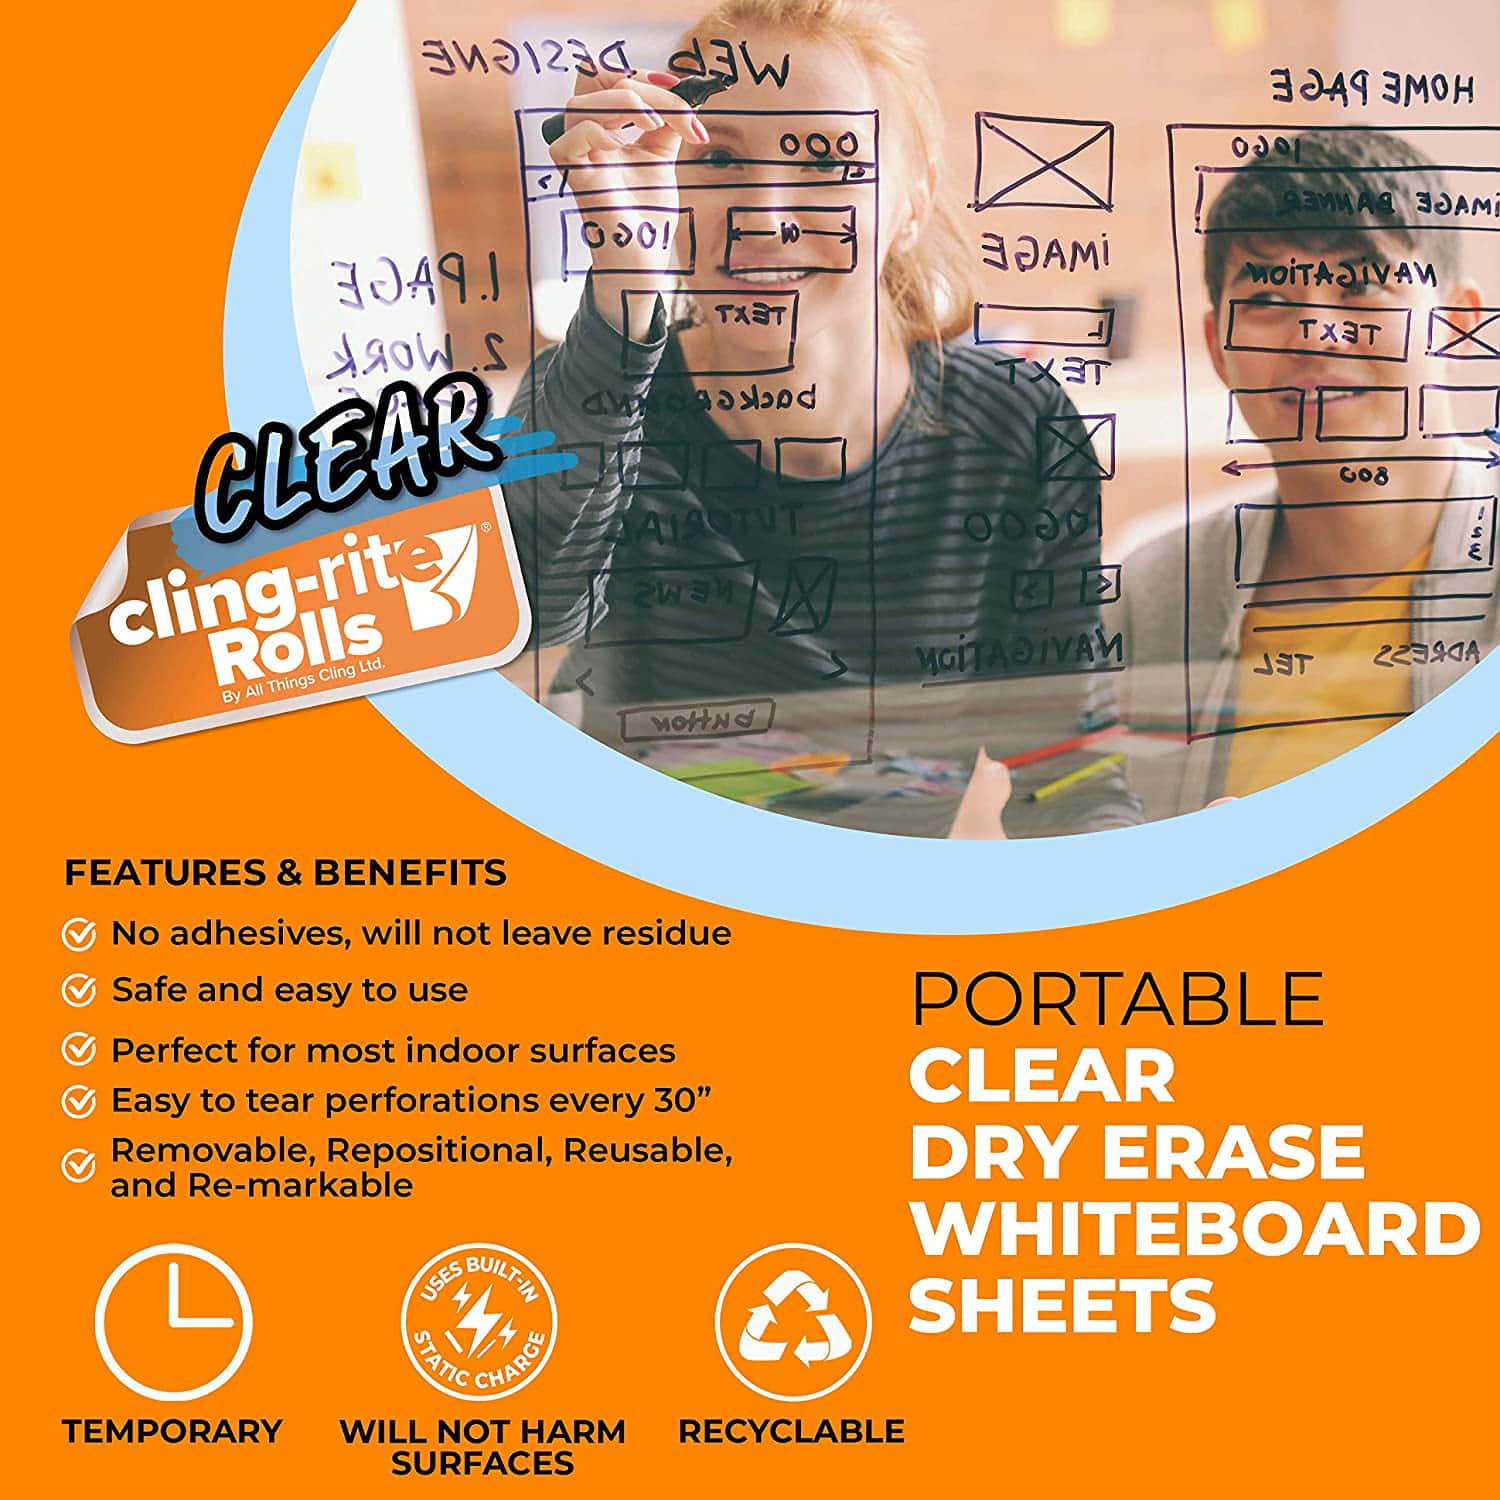 Clear Cling-rite Dry Erase Roll